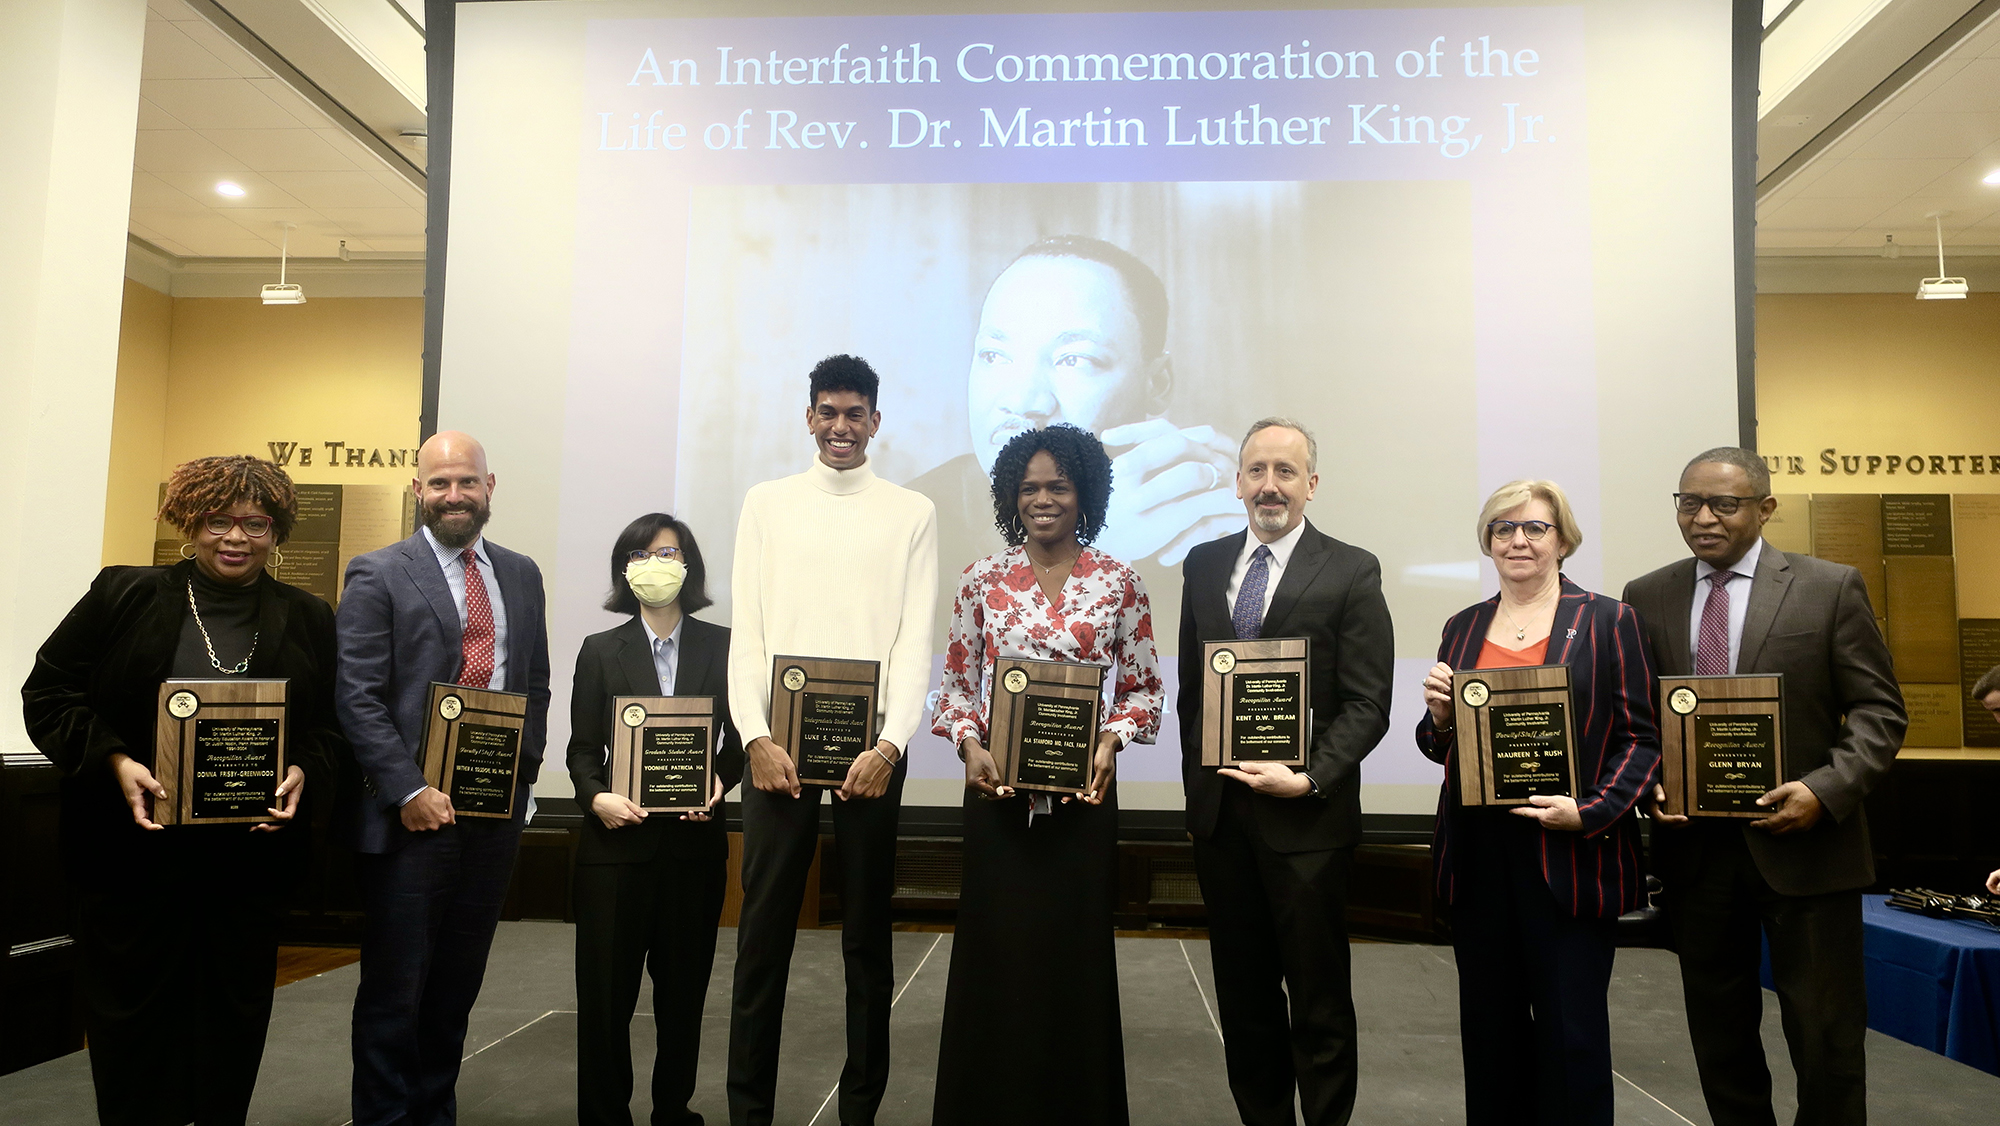 From left to right: Donna Frisby-Greenwood, Matthew Goldshore, Yoonhee Patricia Ha, Luke Coleman, Ala Stanford, Kent D.W. Bream, Maureen Rush, and Glenn D. Bryan stand on stage holding their award plaques.